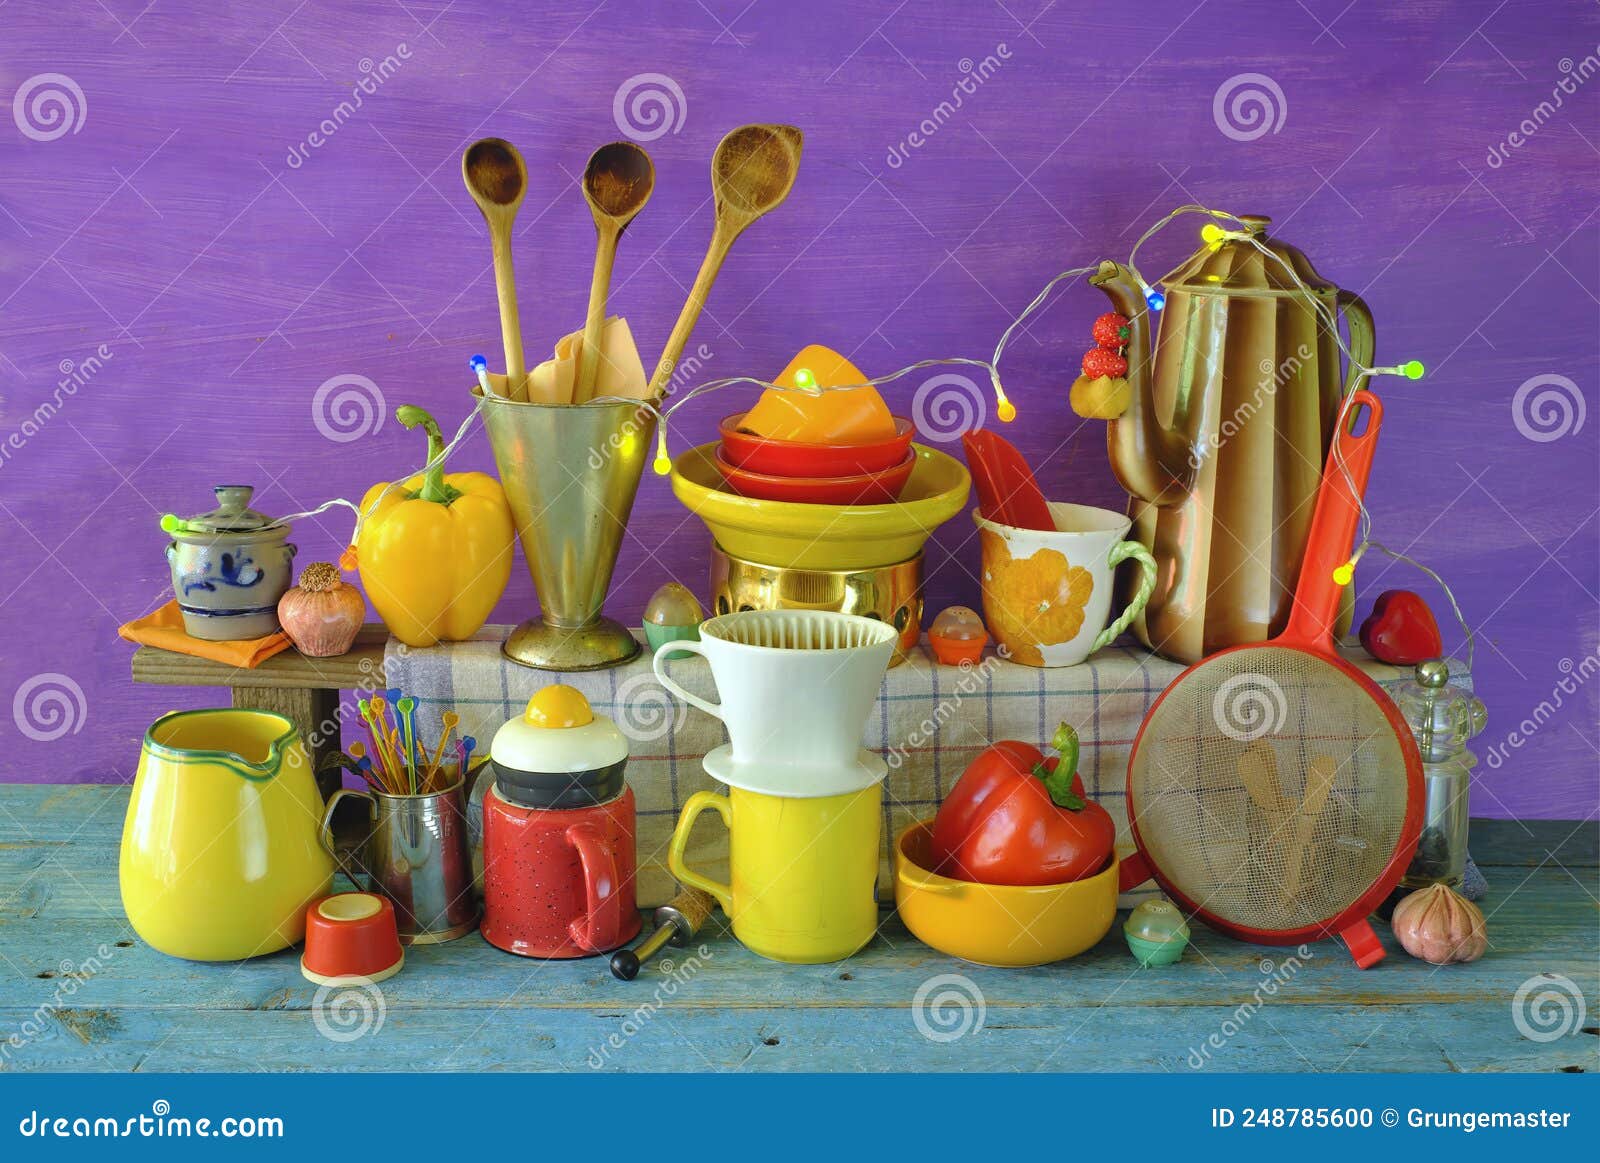 various vintage kitchen utensils from the seventies with vibrant colors, pop and trashy style kitchen still life